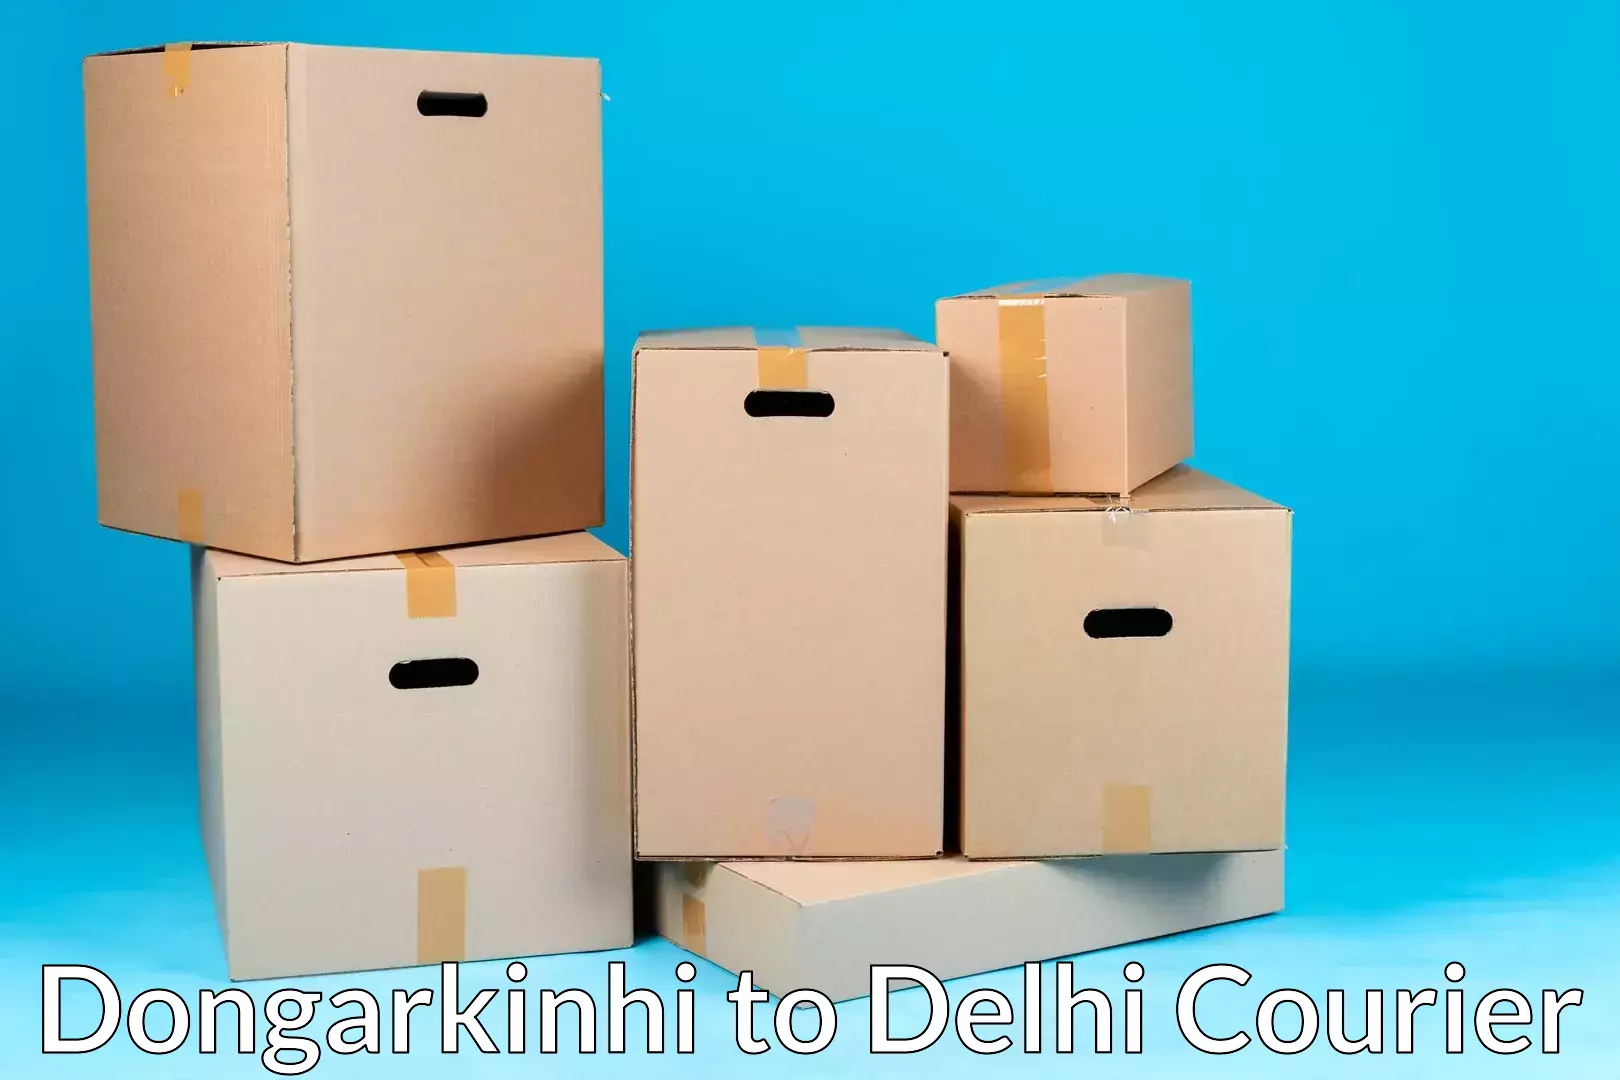 Reliable moving assistance Dongarkinhi to East Delhi